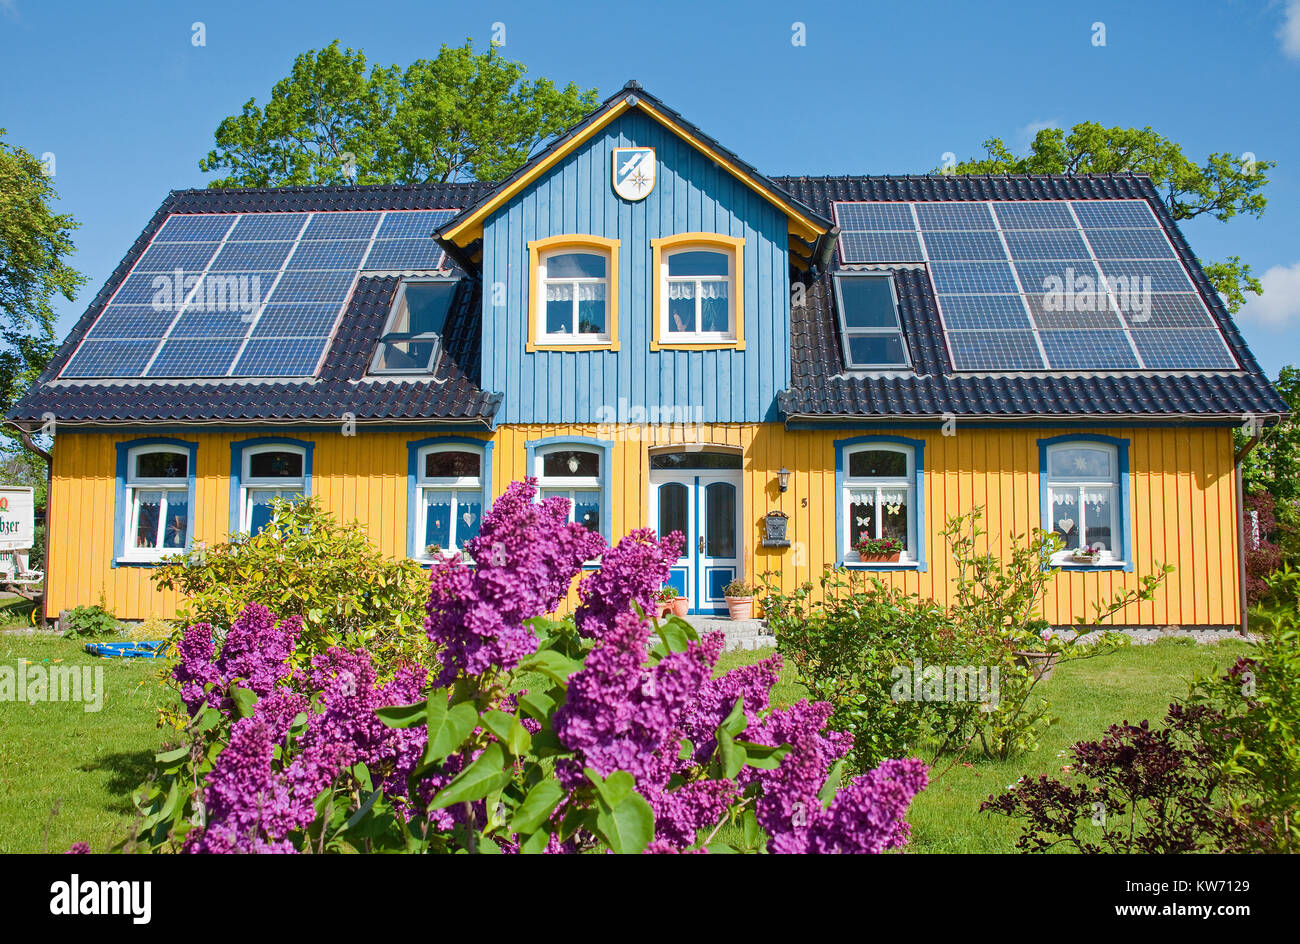 Wooden house with photovoltaics on roof, village Born at Darss, Fischland, Mecklenburg-Western Pomerania, Baltic sea, Germany, Europe Stock Photo